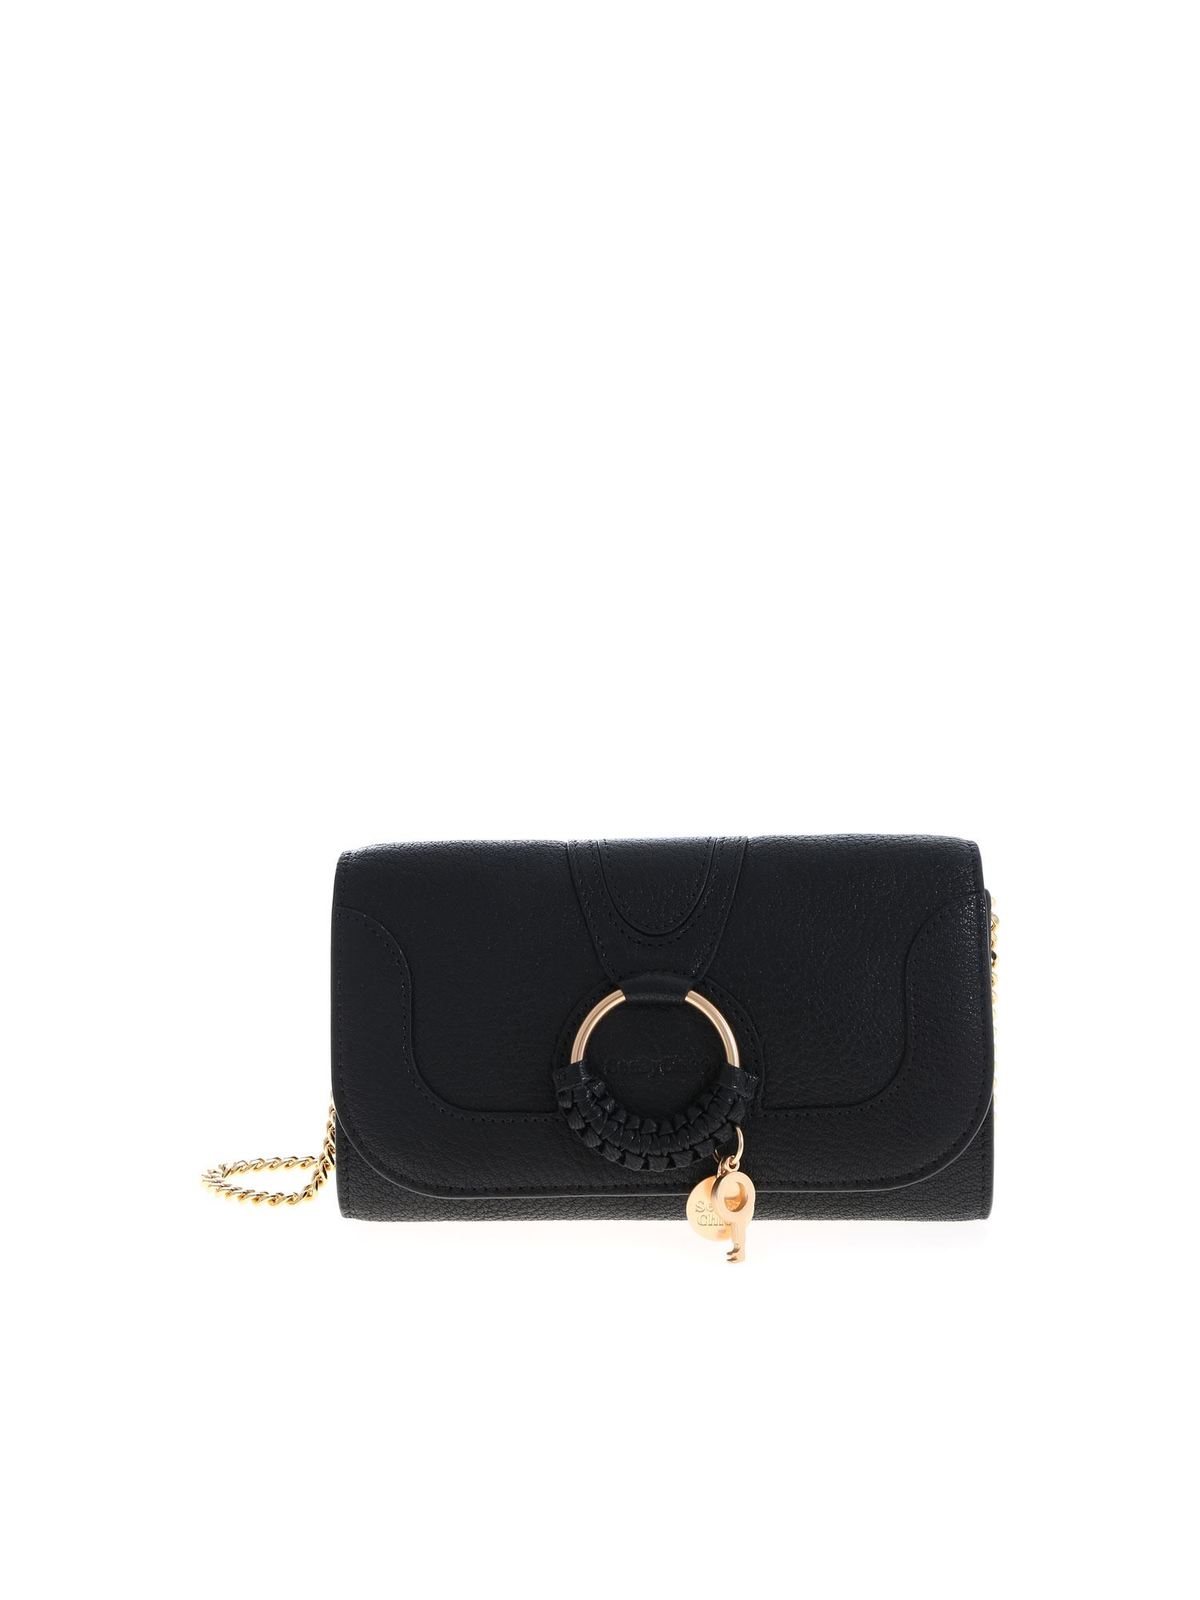 See By Chloé Hana Large Leather Wallet On A Chain In Black